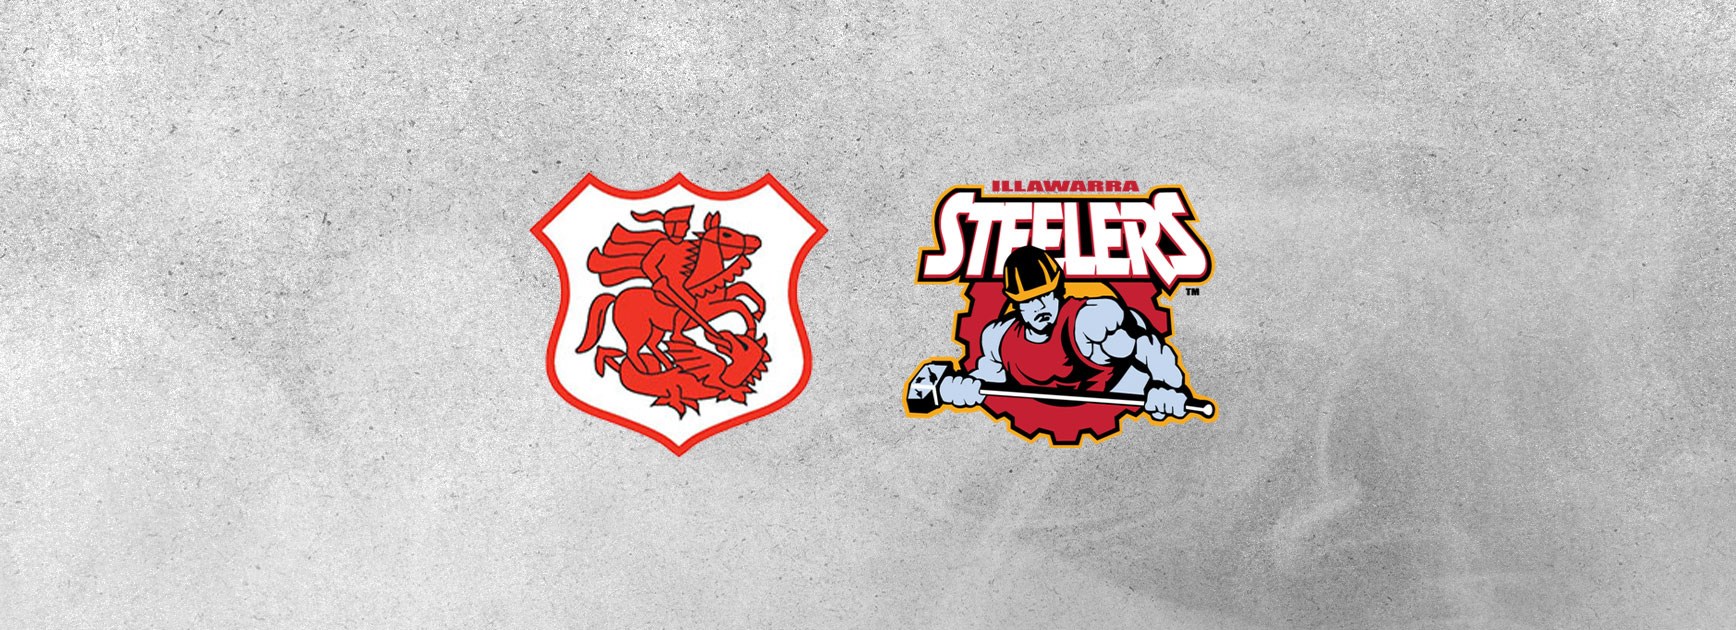 Dragons Pathways Wrap: Steelers fall to Knights in elimination final